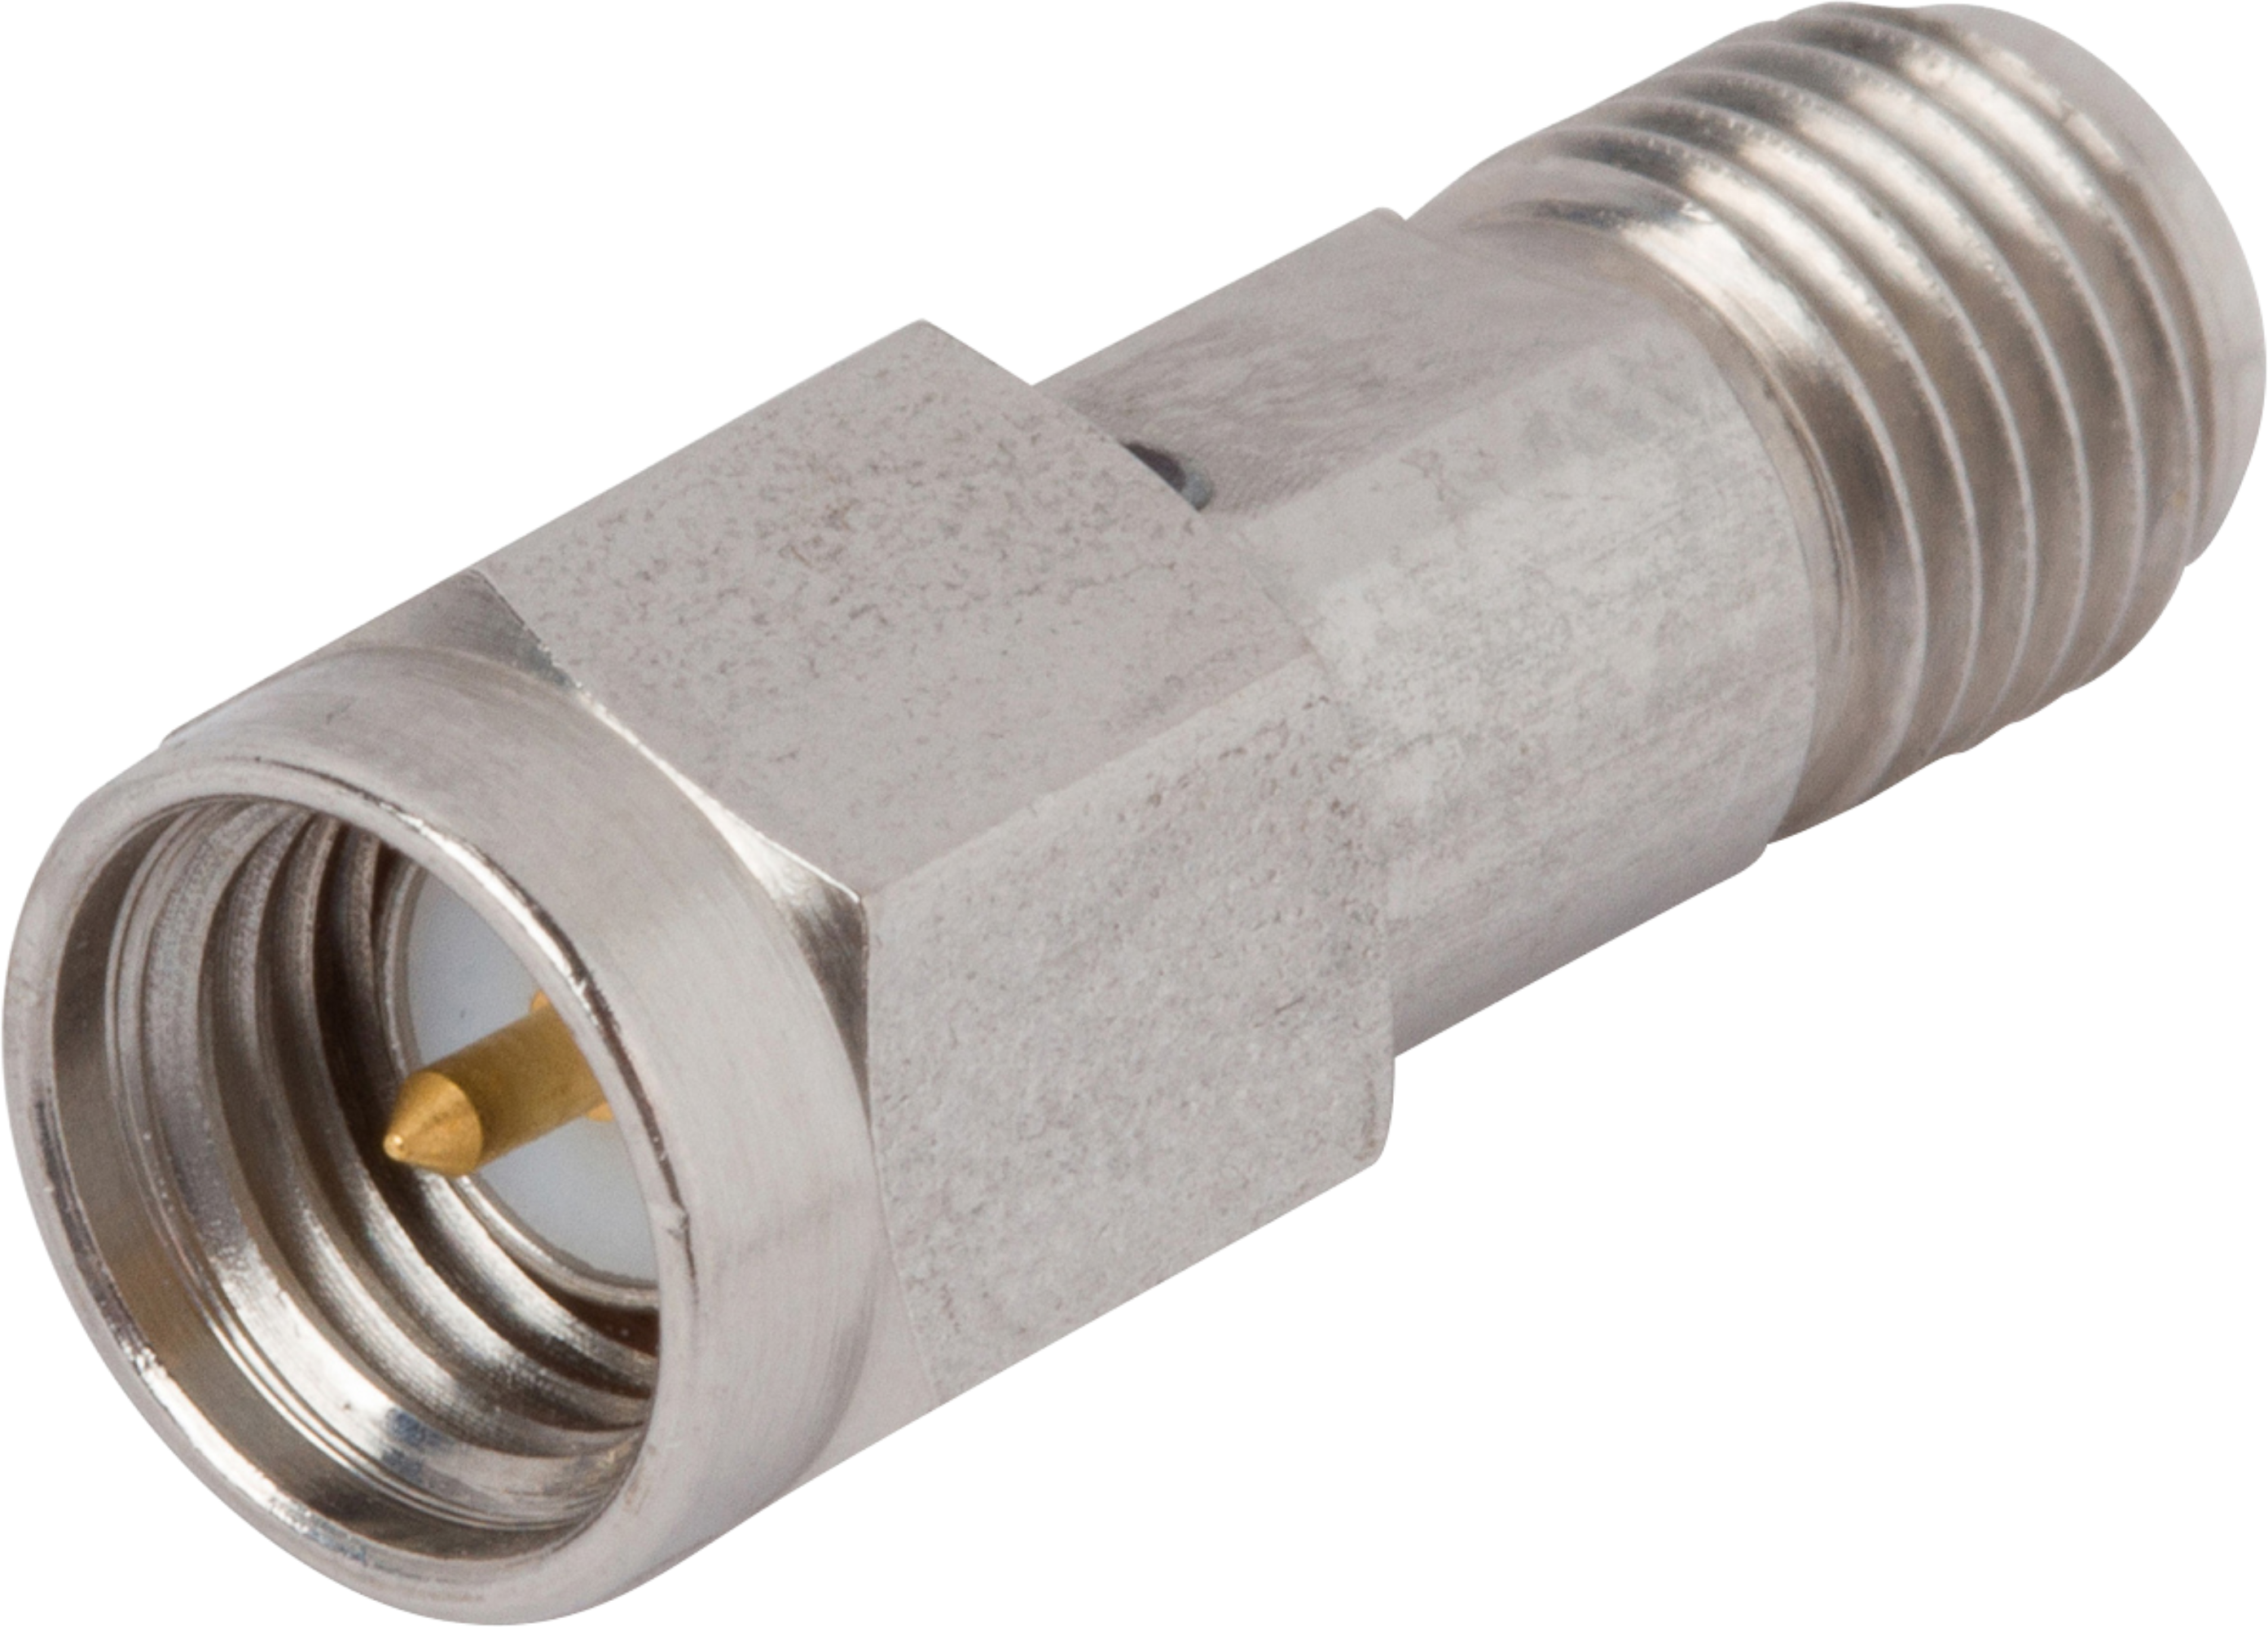 2.92mm Female to SMA Male Adapter, SF1115-6007